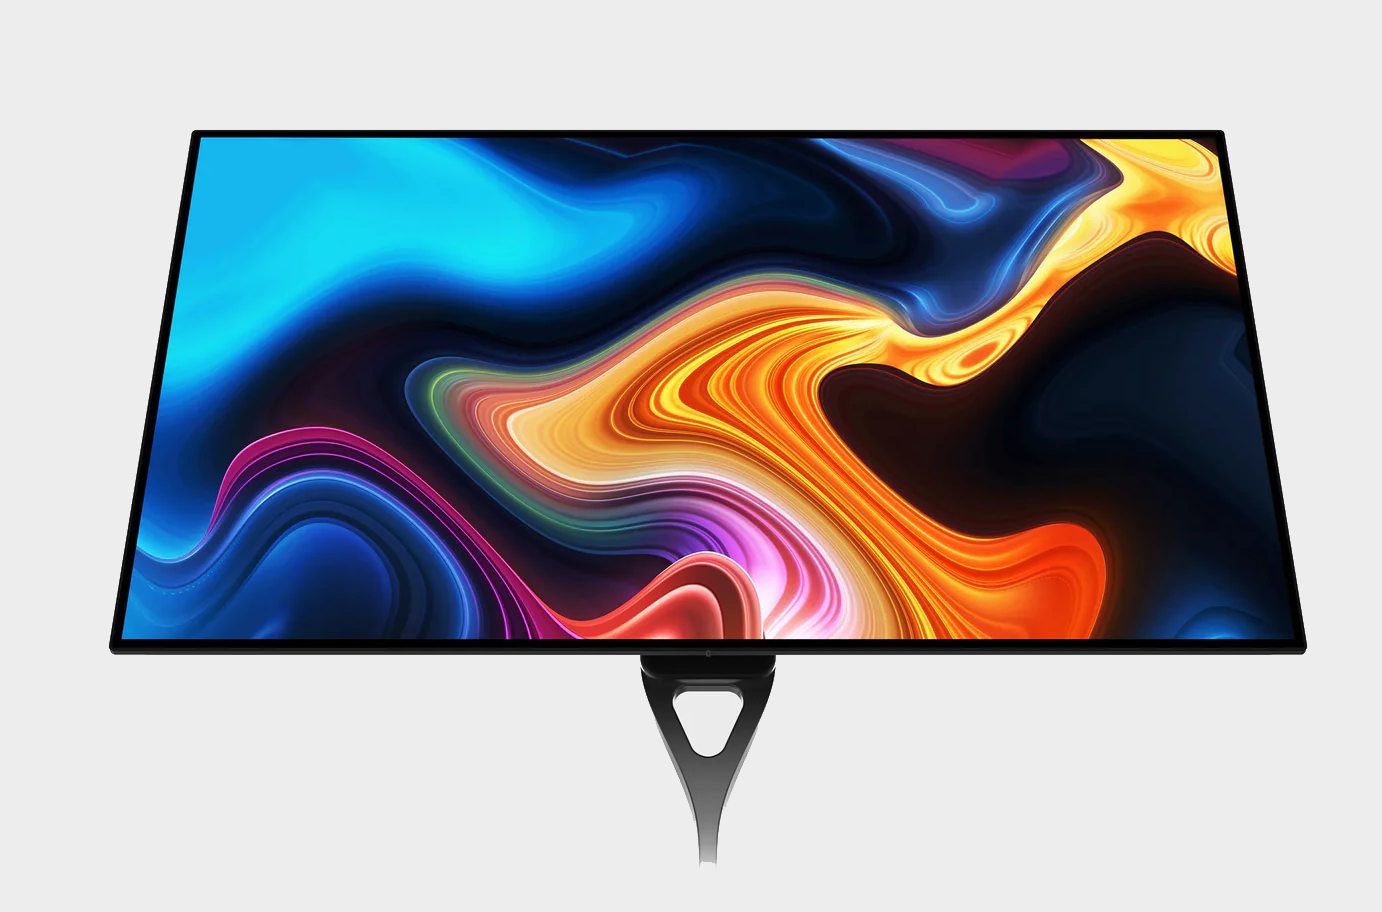 That 4K 32-inch OLED gaming monitor you've been waiting for will